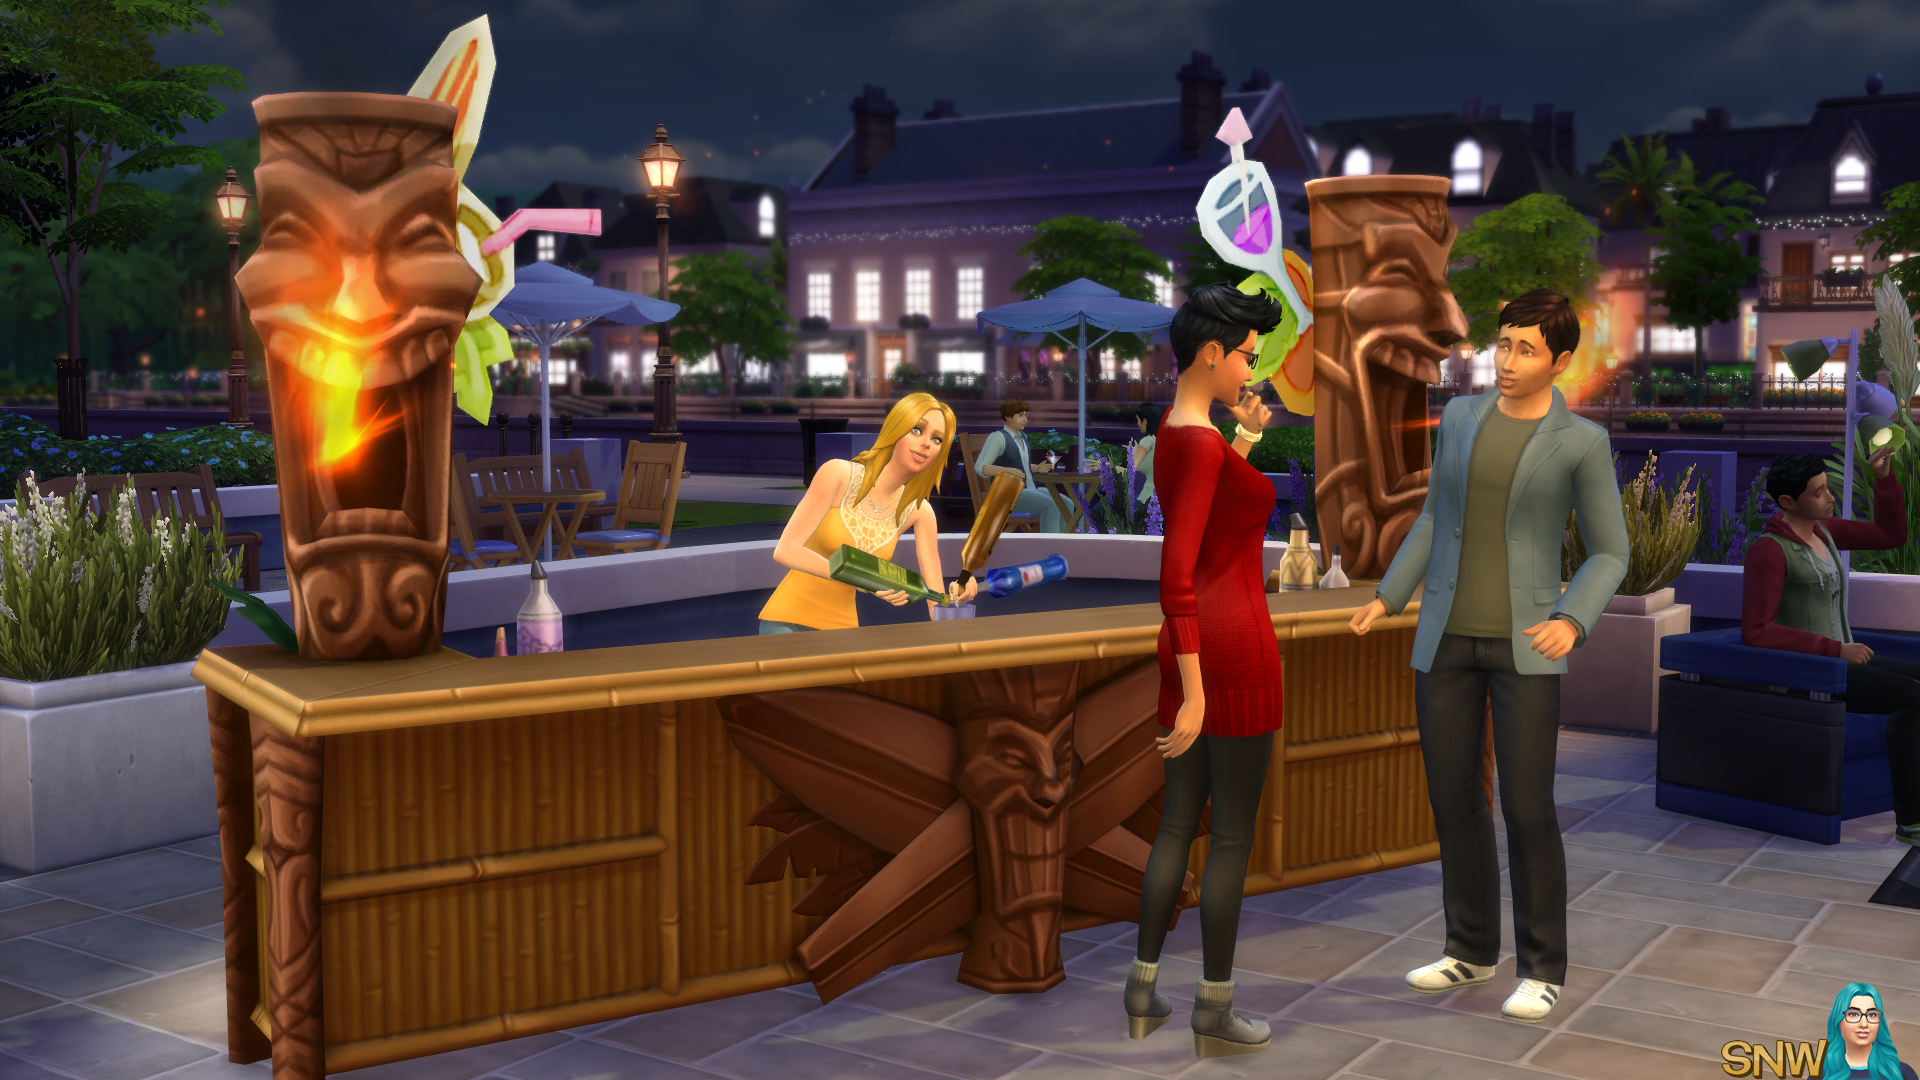 The Sims 4 Deluxe Party Edition on consoles PS4 Xbox One screenshot